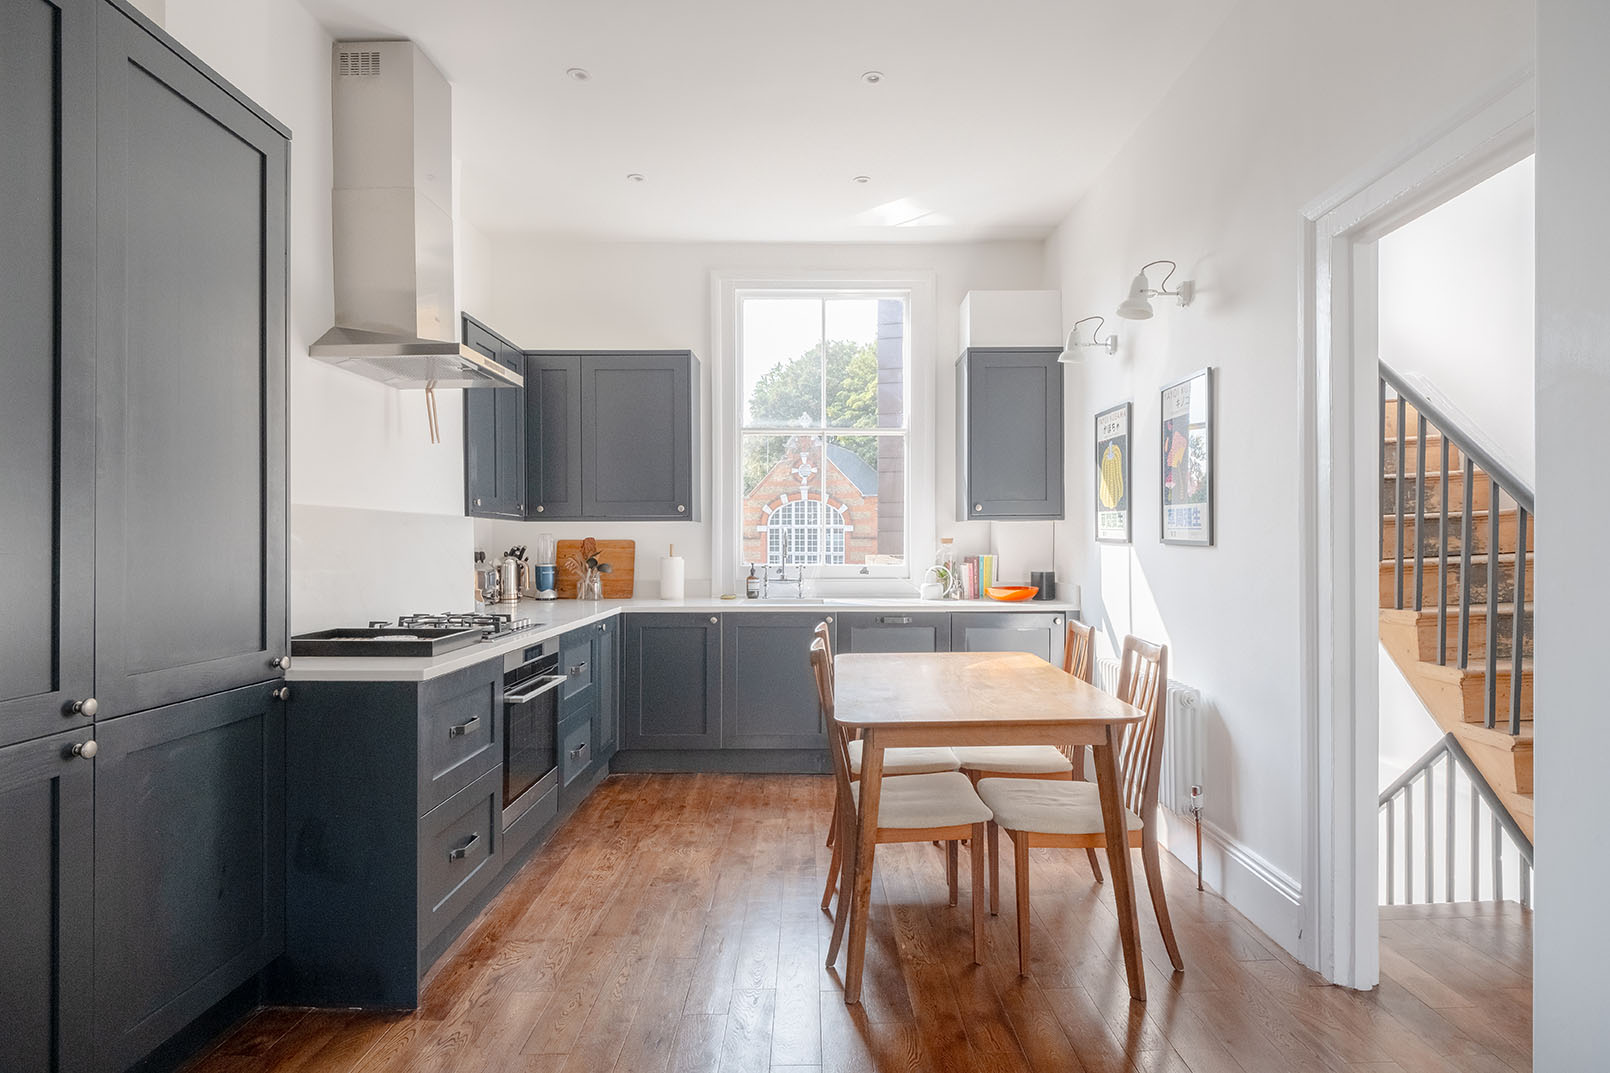 A modern dark grey kitchen for property photography taken for the sale of the property.